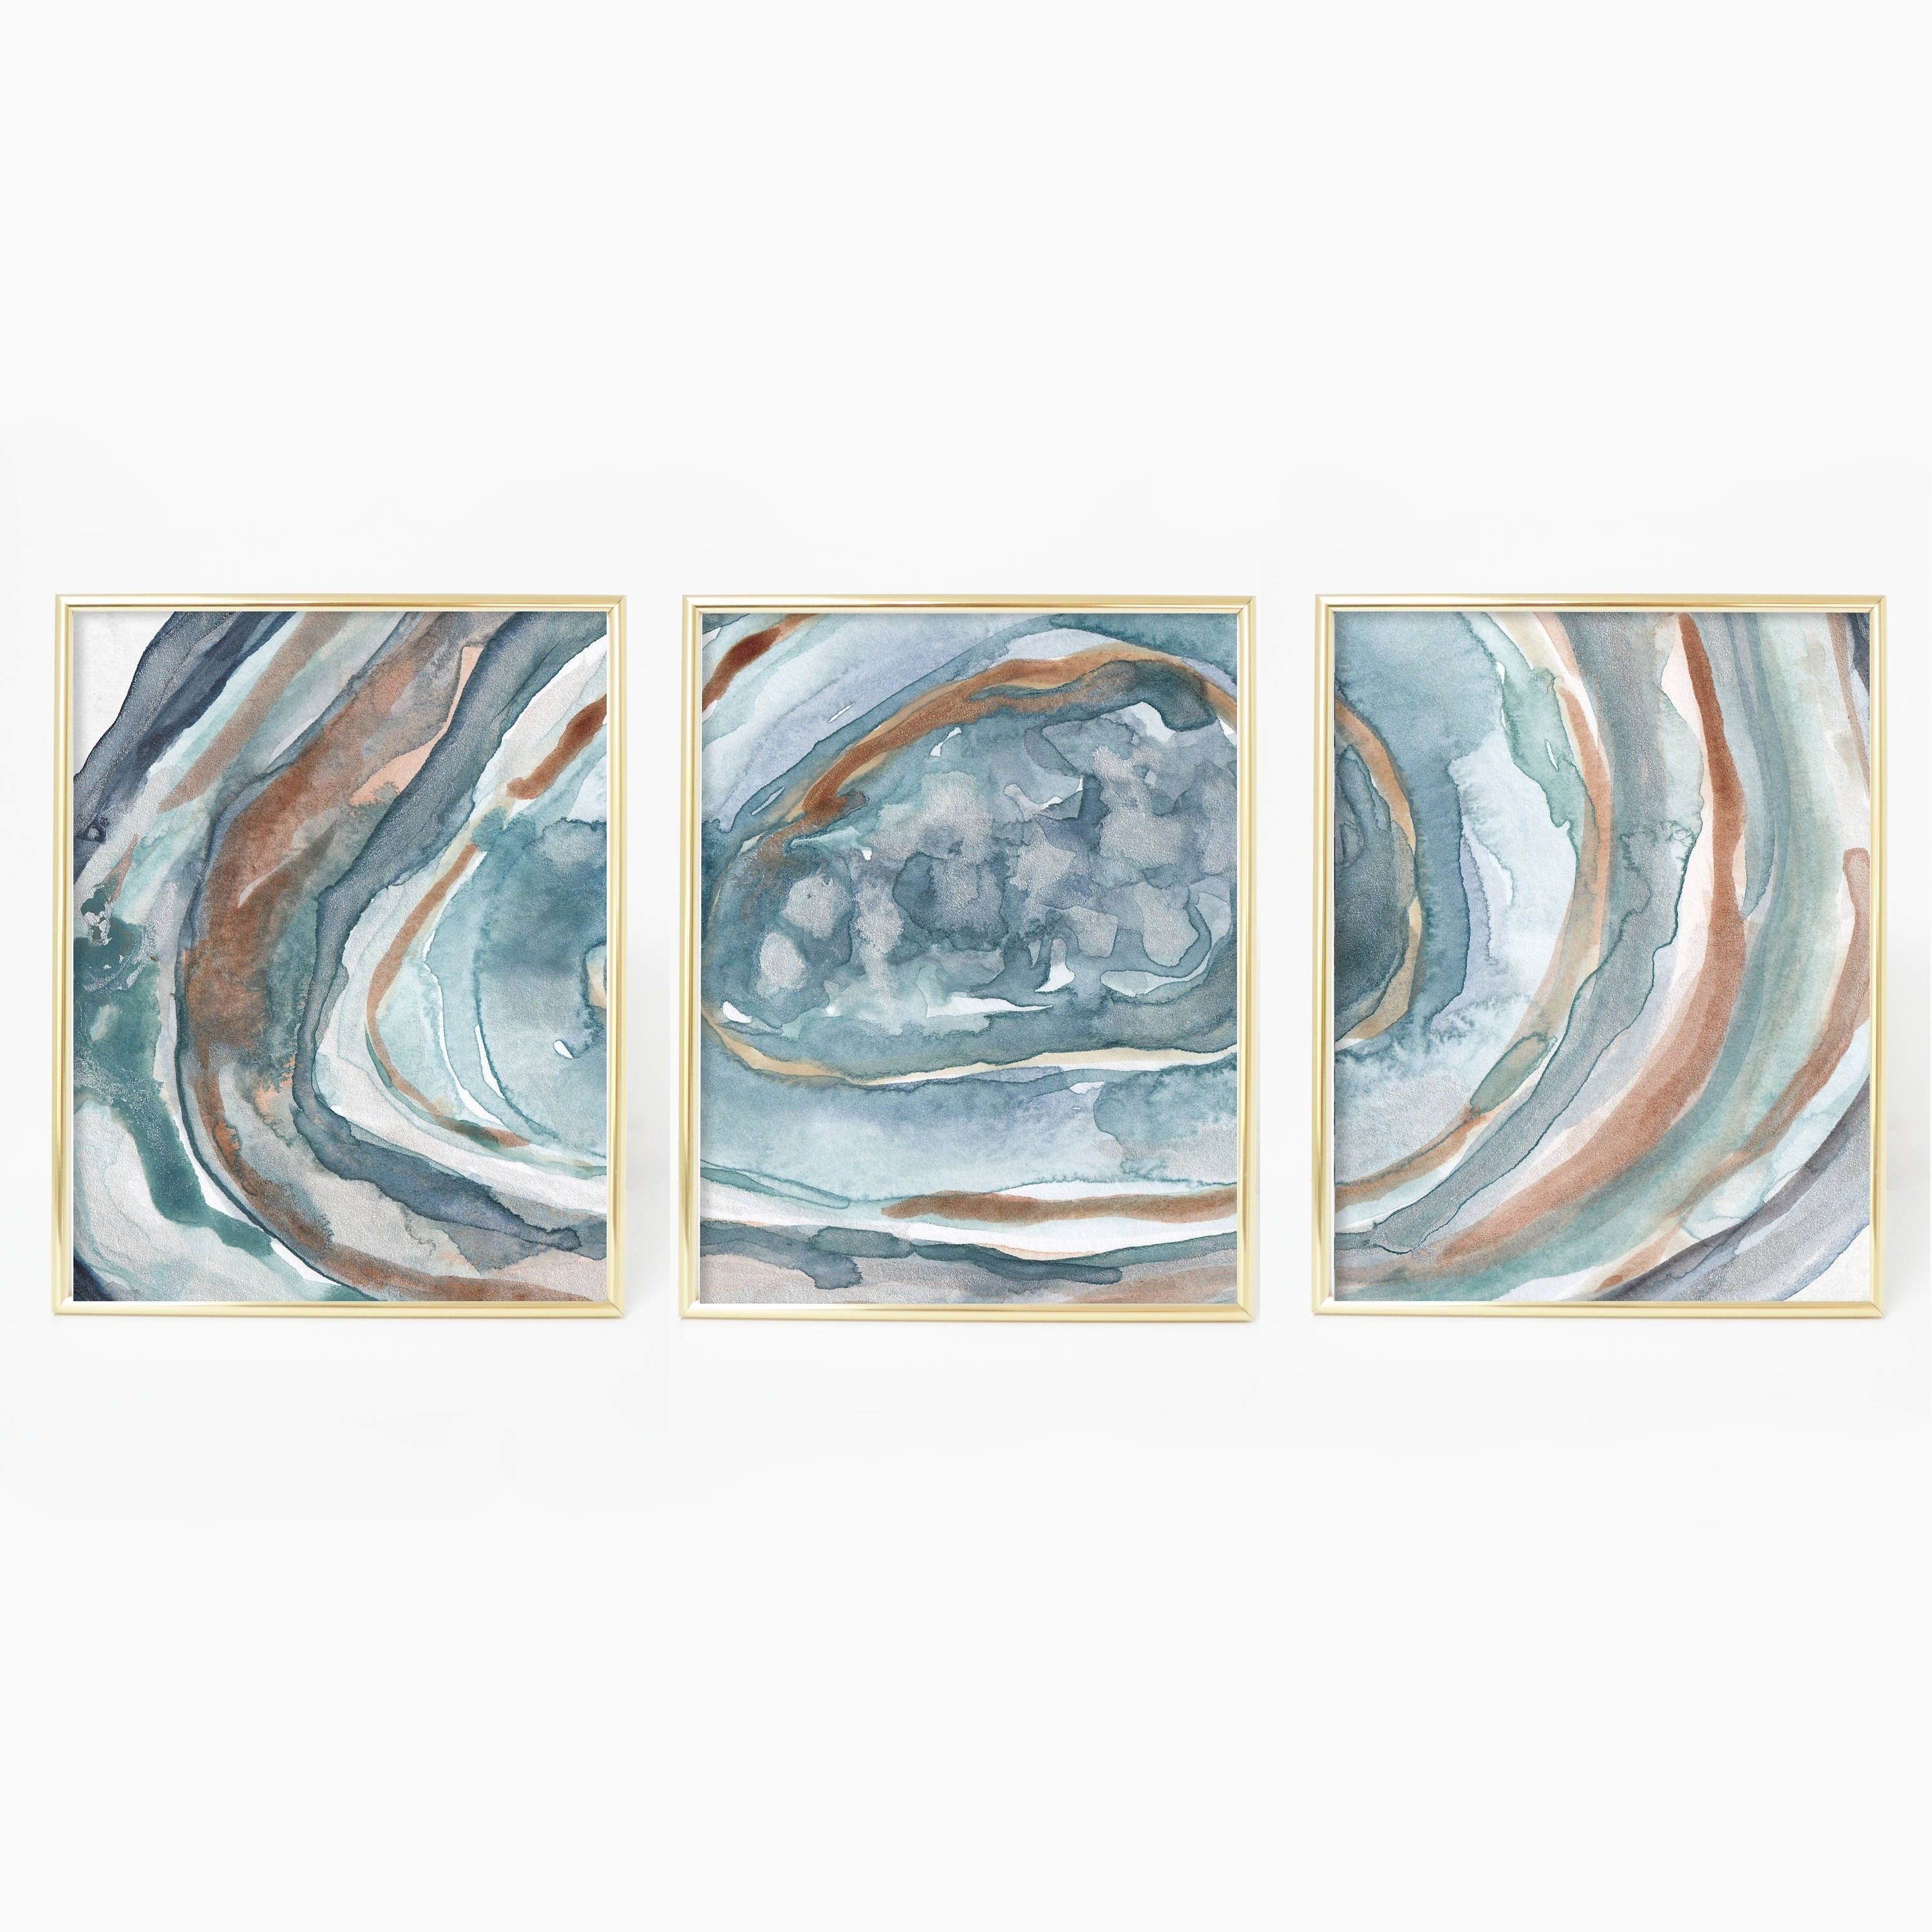 Most Current Turquoise Wall Art Intended For Turquoise Agate Print, Crystal Wall Art, Geode Painting, Watercolor (View 11 of 20)